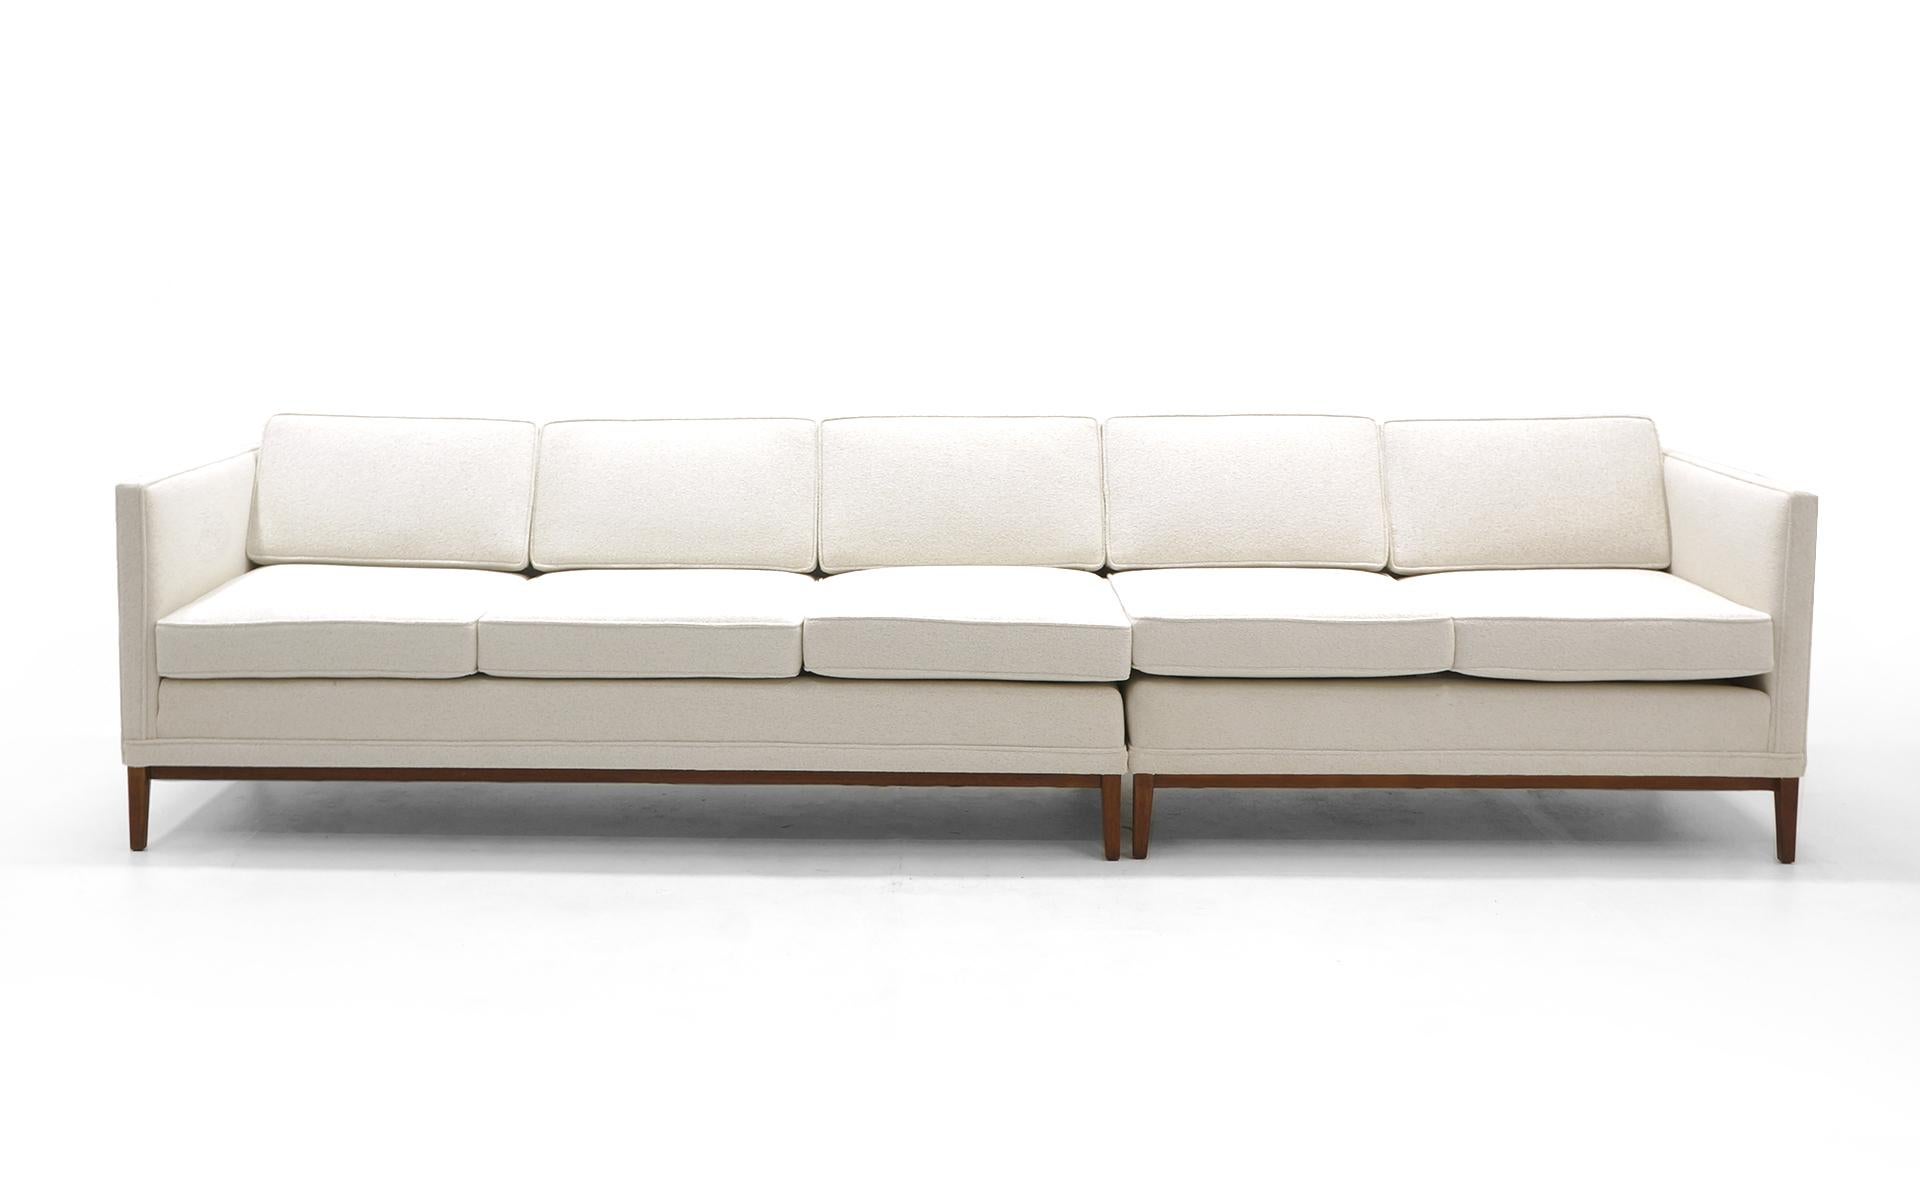 Sectional sofa in the style of Edward Wormley for Dunbar. Even arm, elegant design. Expertly restored and reupholstered in an off white HBF Textiles Merci bouclé. As you see in the photos, these can be used as an L shape or together they make a sofa